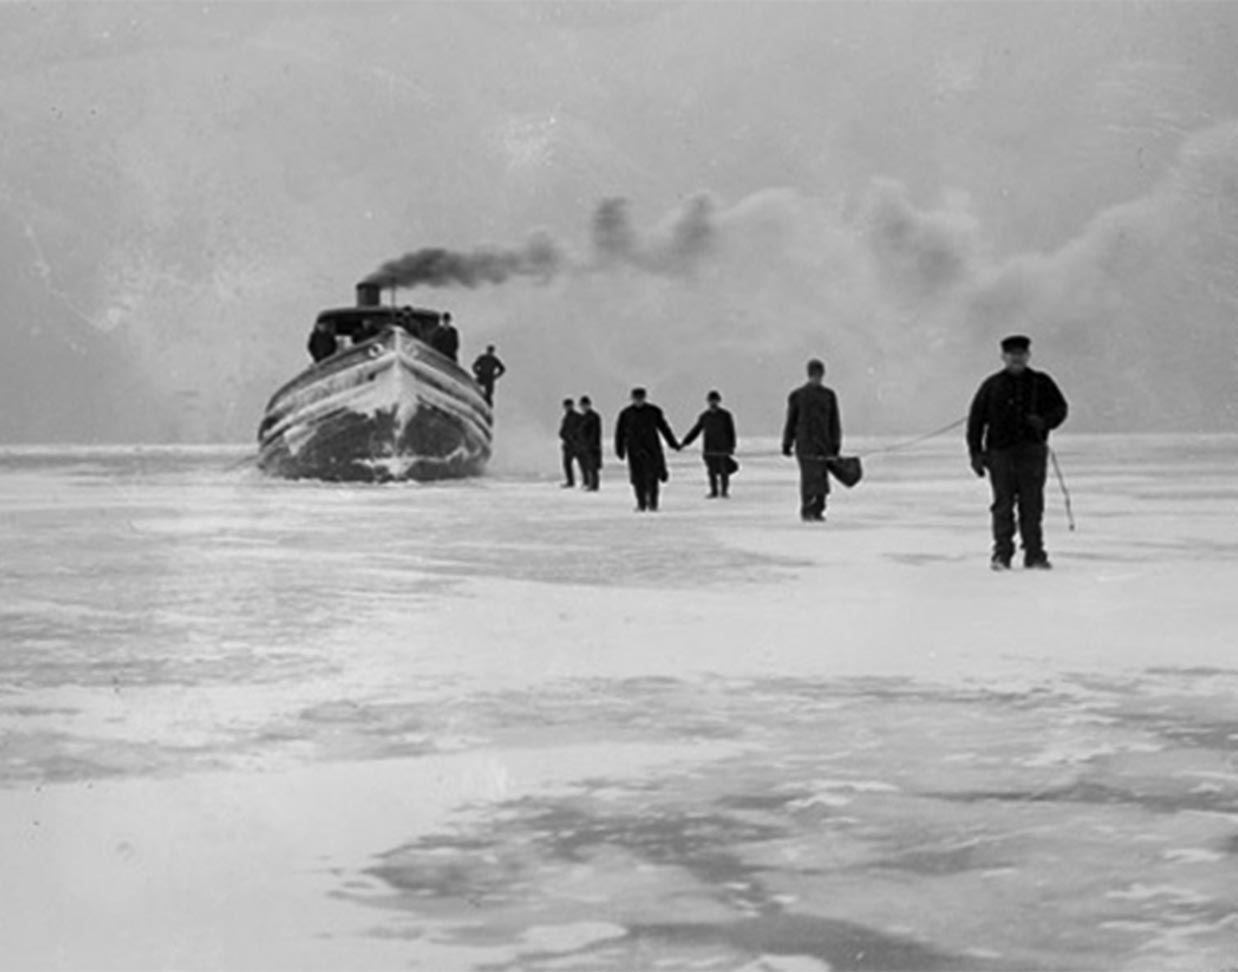 Image of men walking on the partially frozen ice of Lake Michigan, with a steamship or tugboat in the background in Chicago, Illinois. DN-0001833, Chicago Daily News negatives collection, Chicago History Museum.